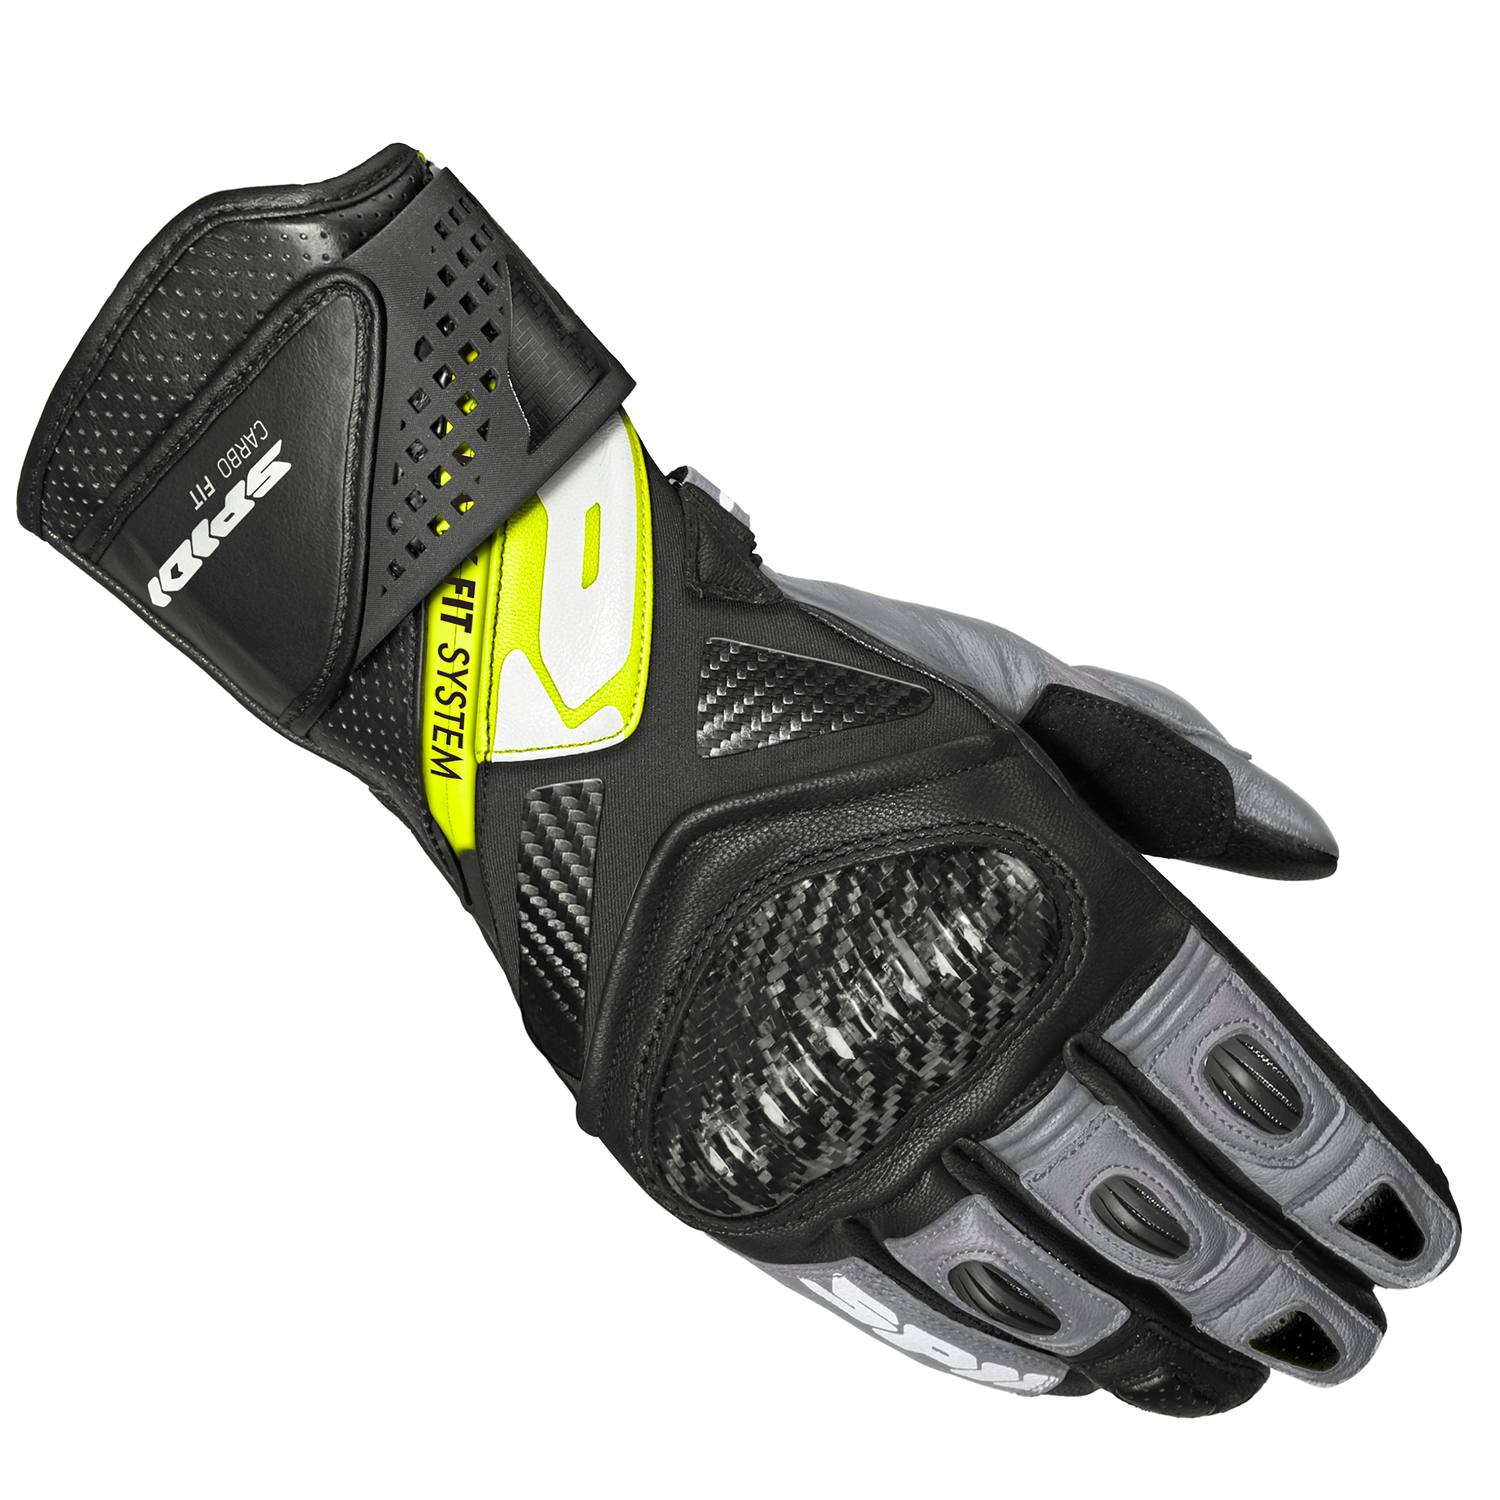 Image of Spidi Carbo Fit Gloves Black Fluorescente Yellow Size L ID 8030161481556